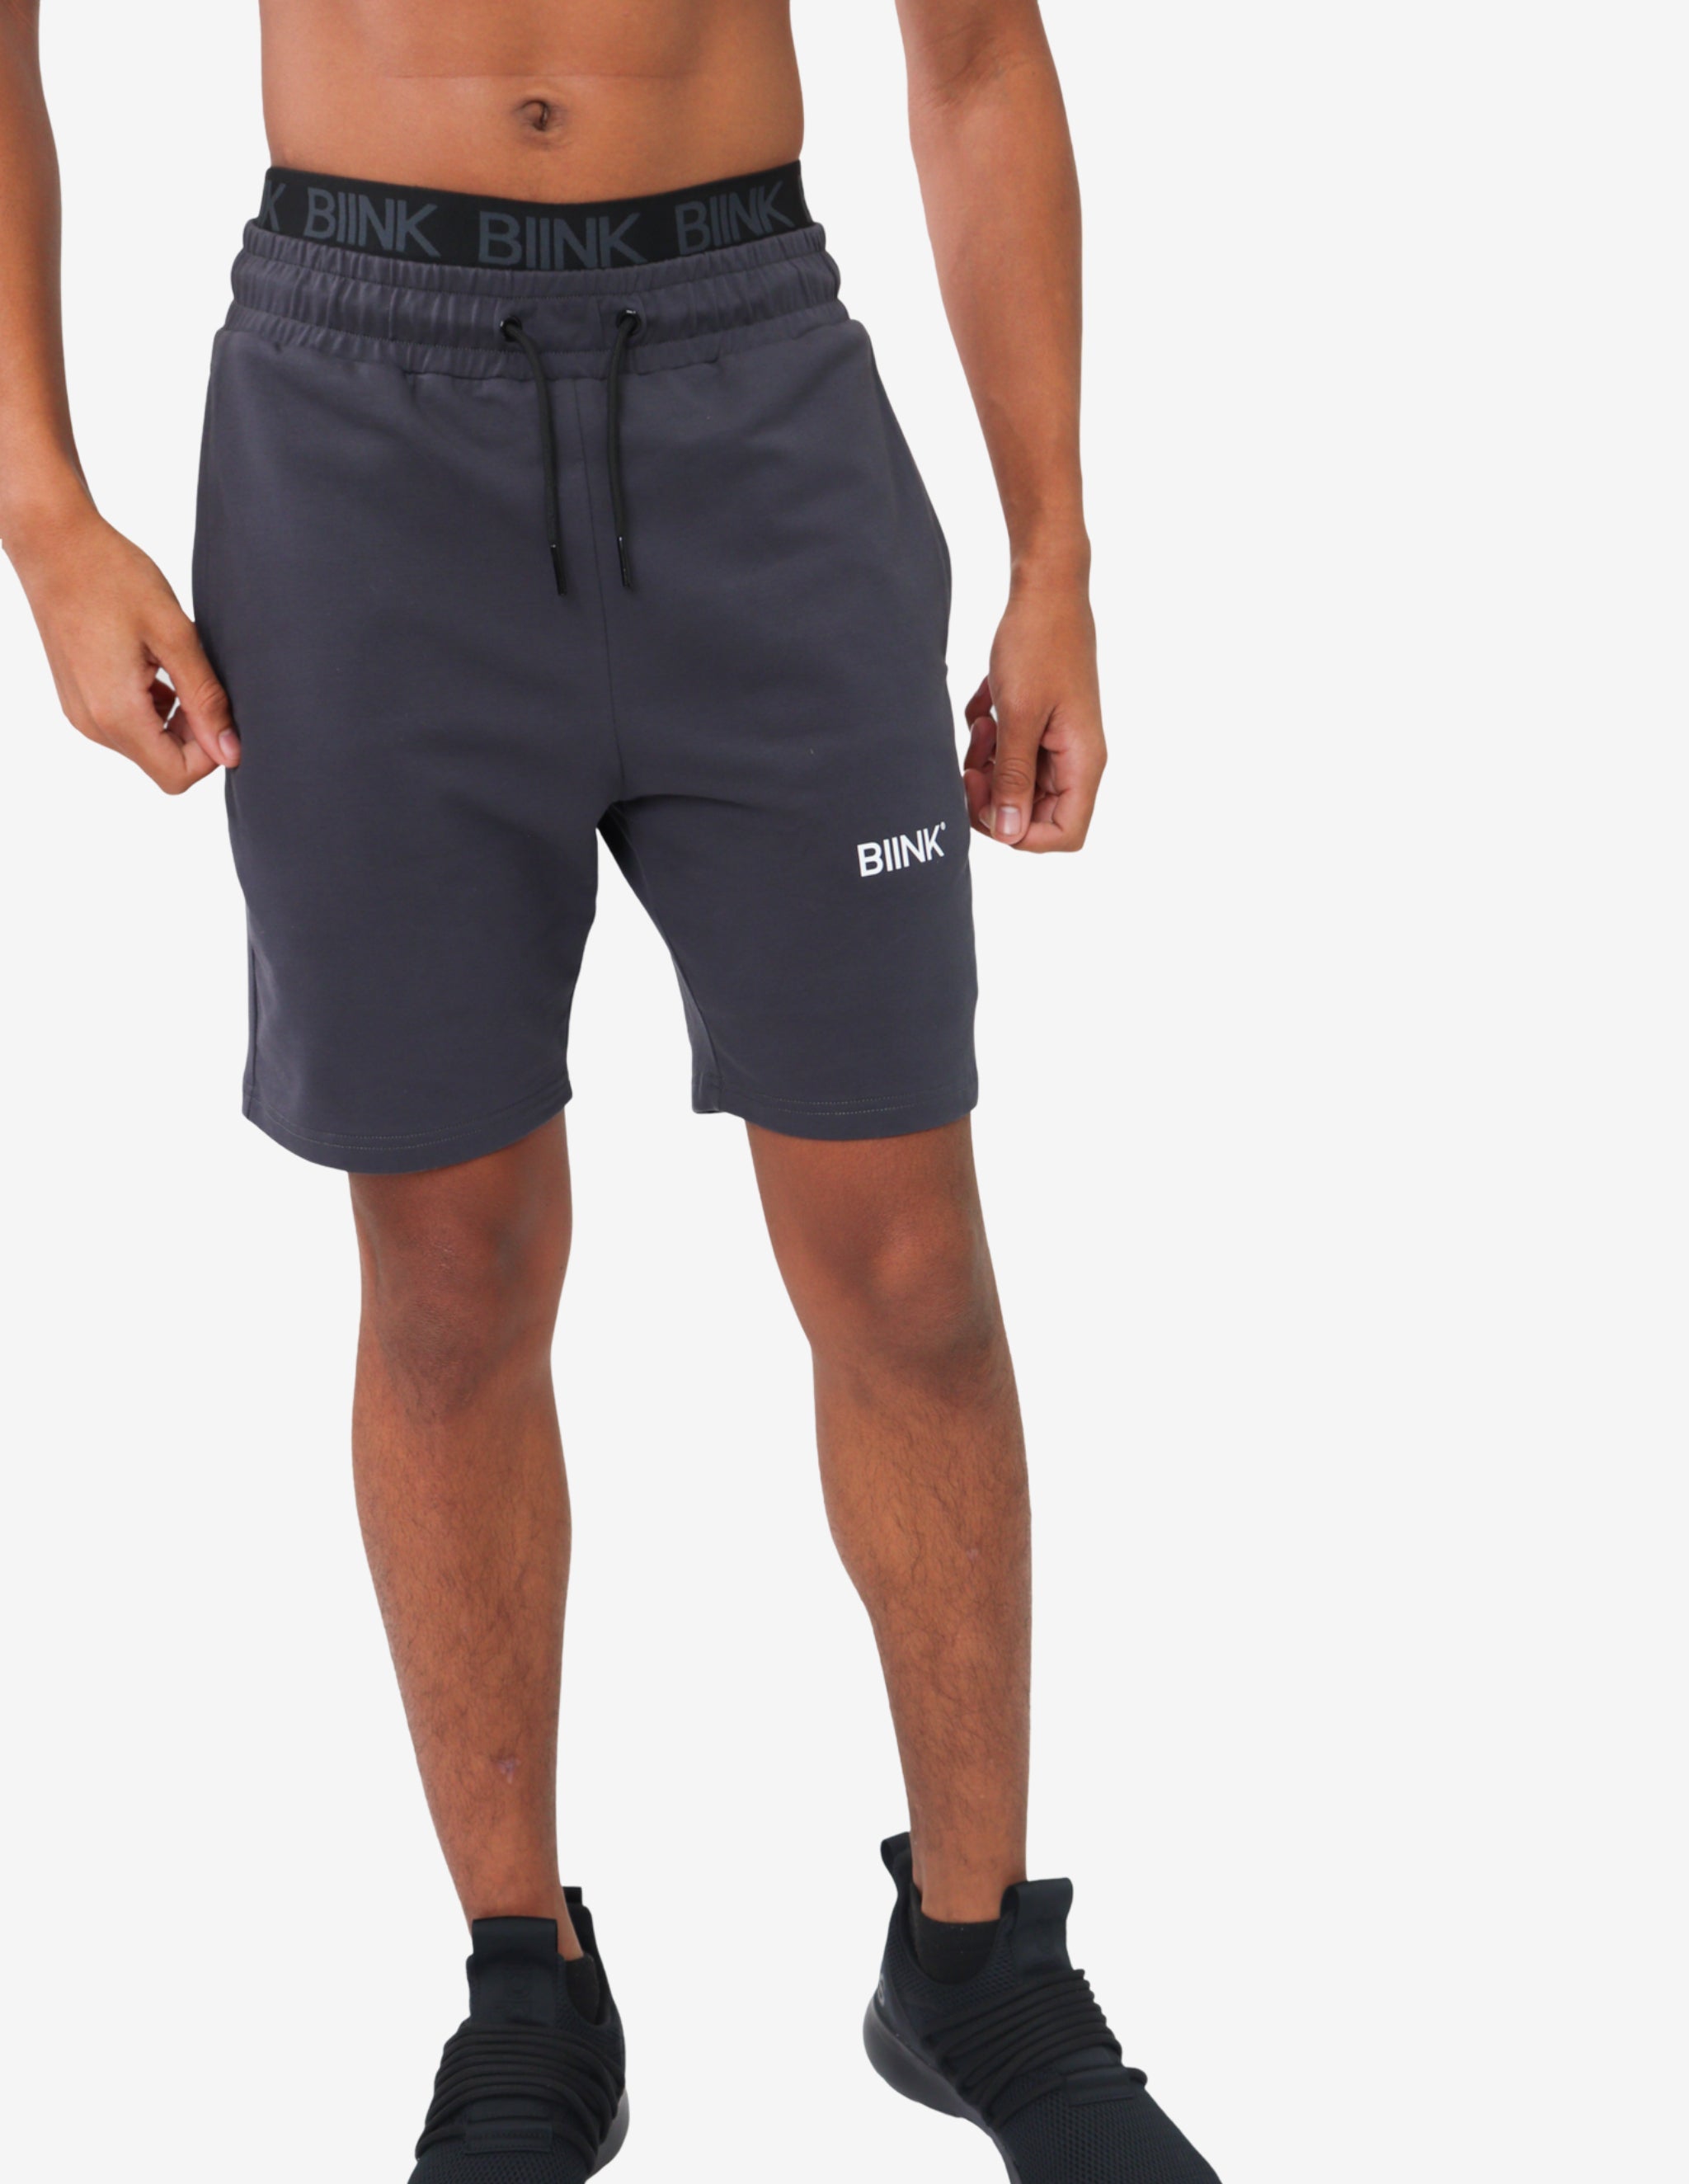 Regal Fitted Shorts - Stealth Grey-Short Sets-Biink Athleisure-Guru Muscle